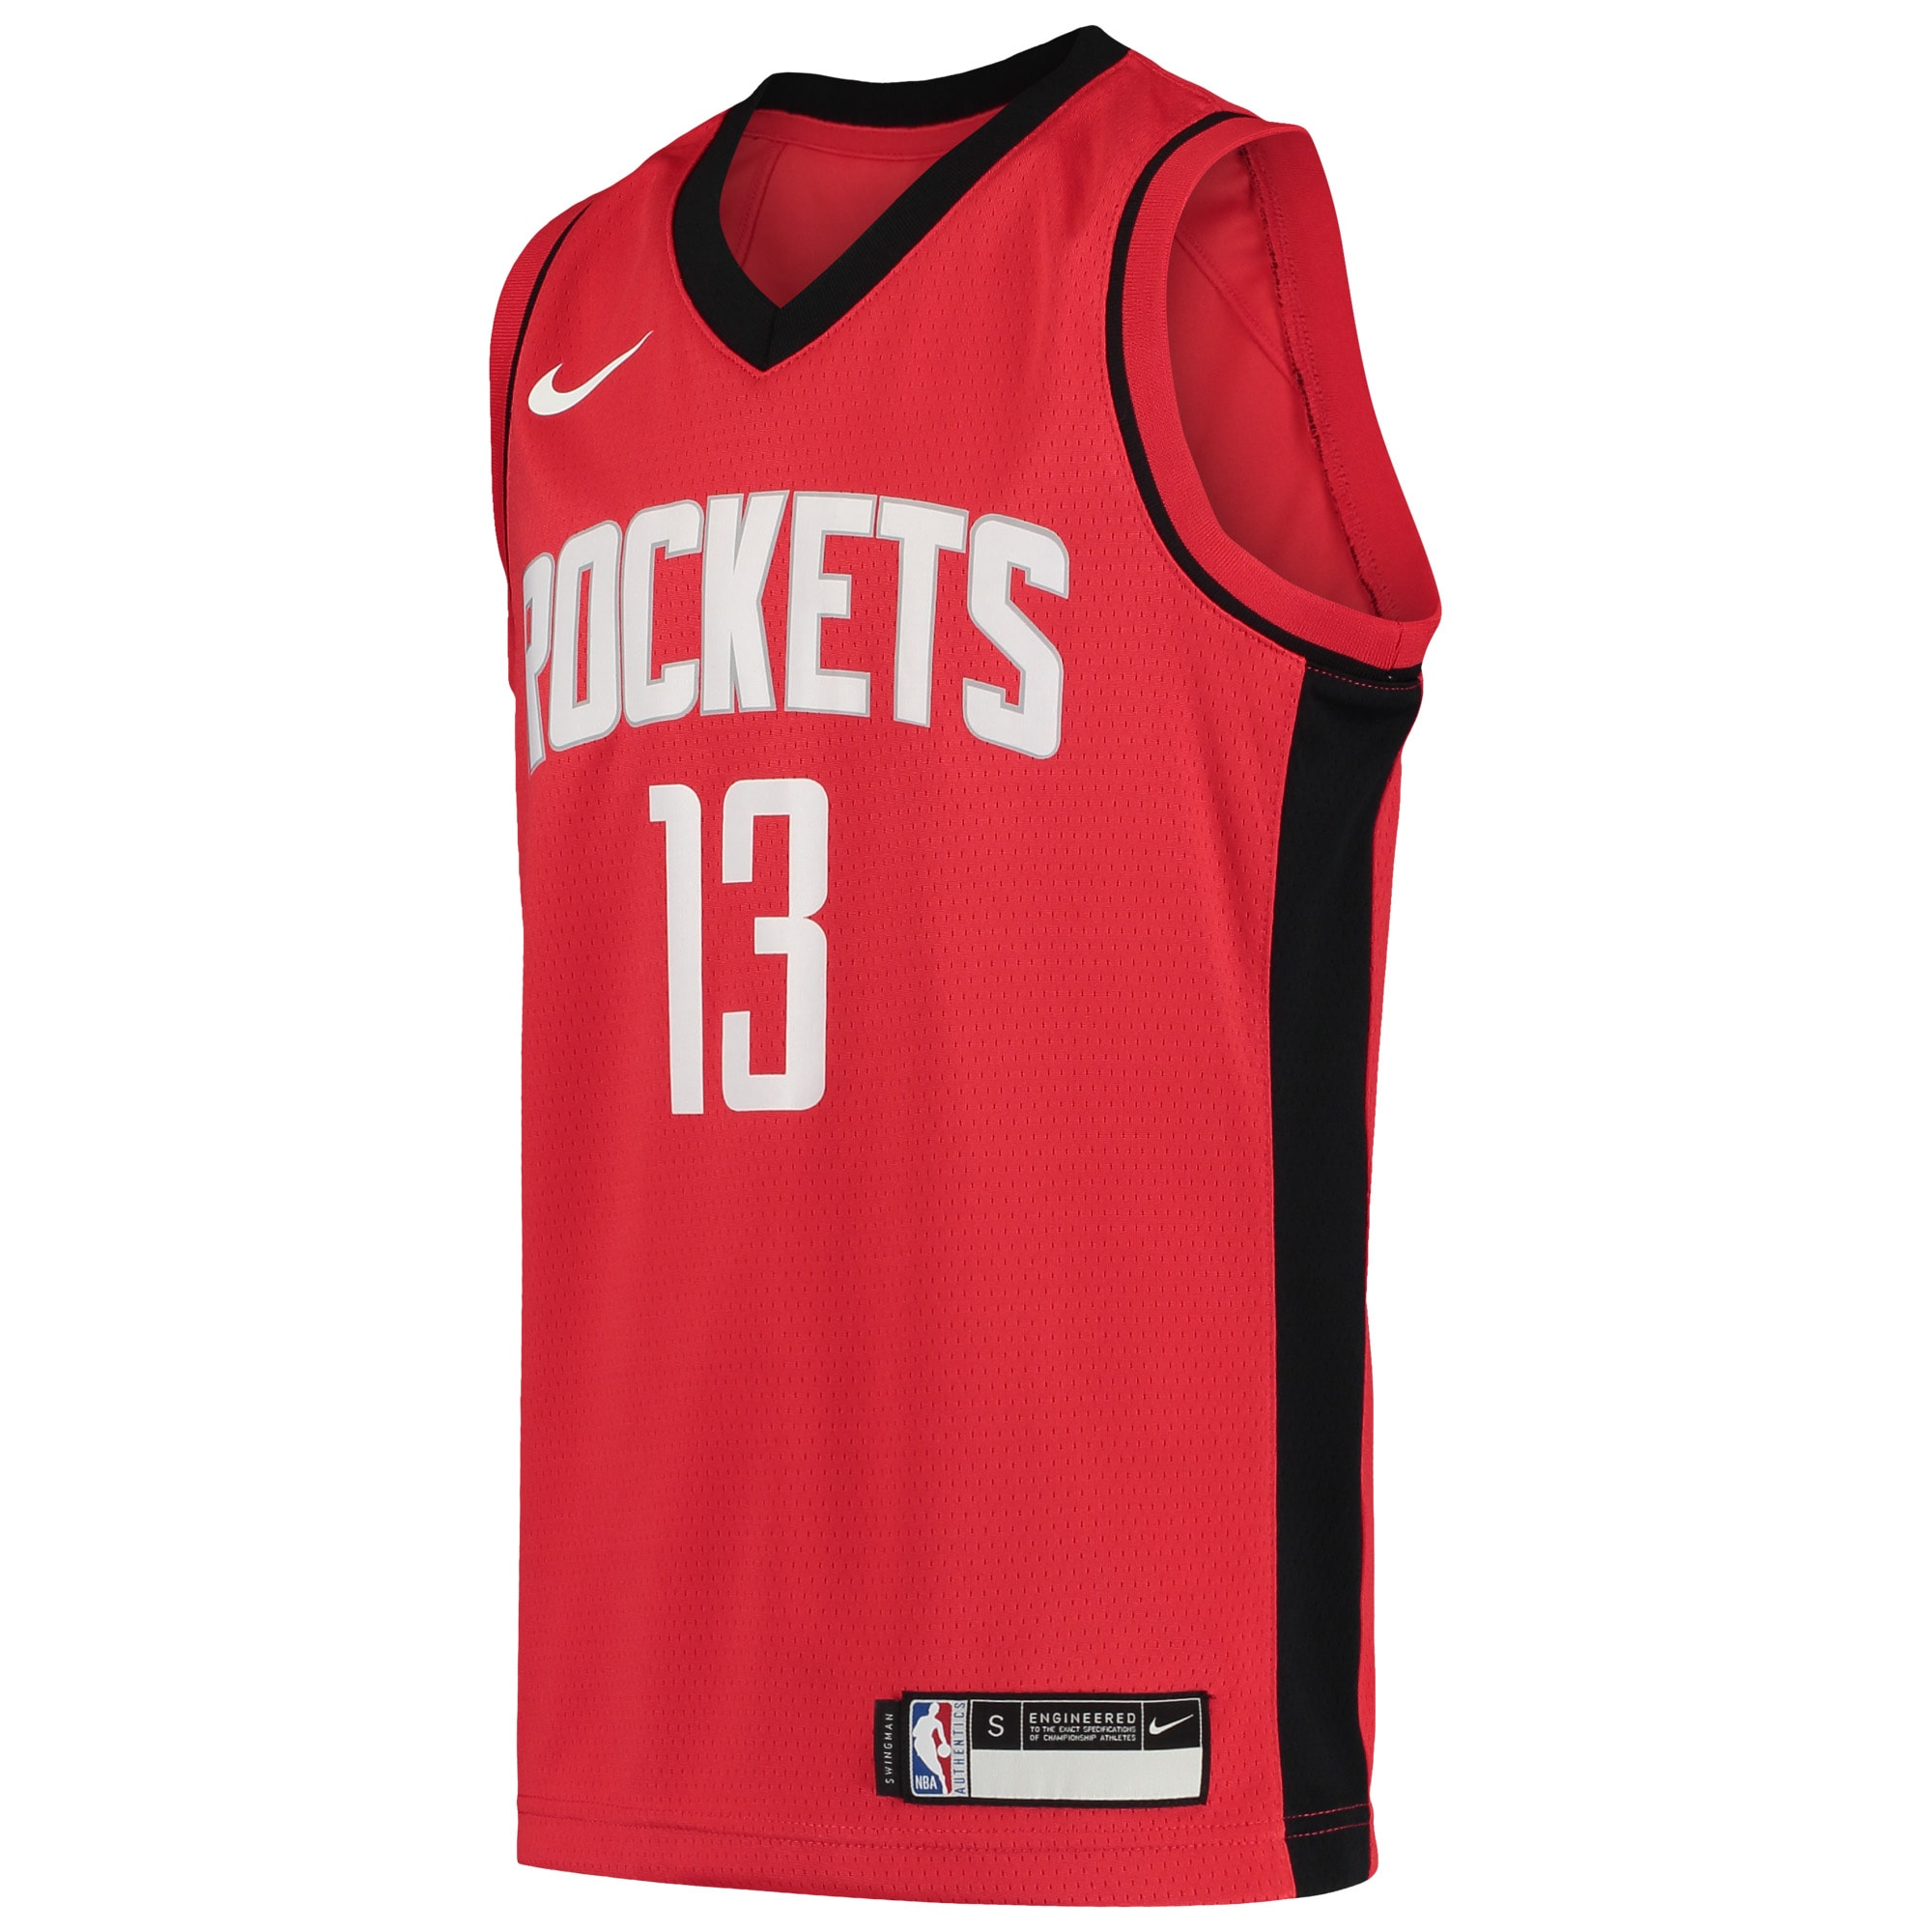 Youth Nike James Harden Red Houston Rockets Team Swingman Jersey - Icon Edition - image 2 of 3